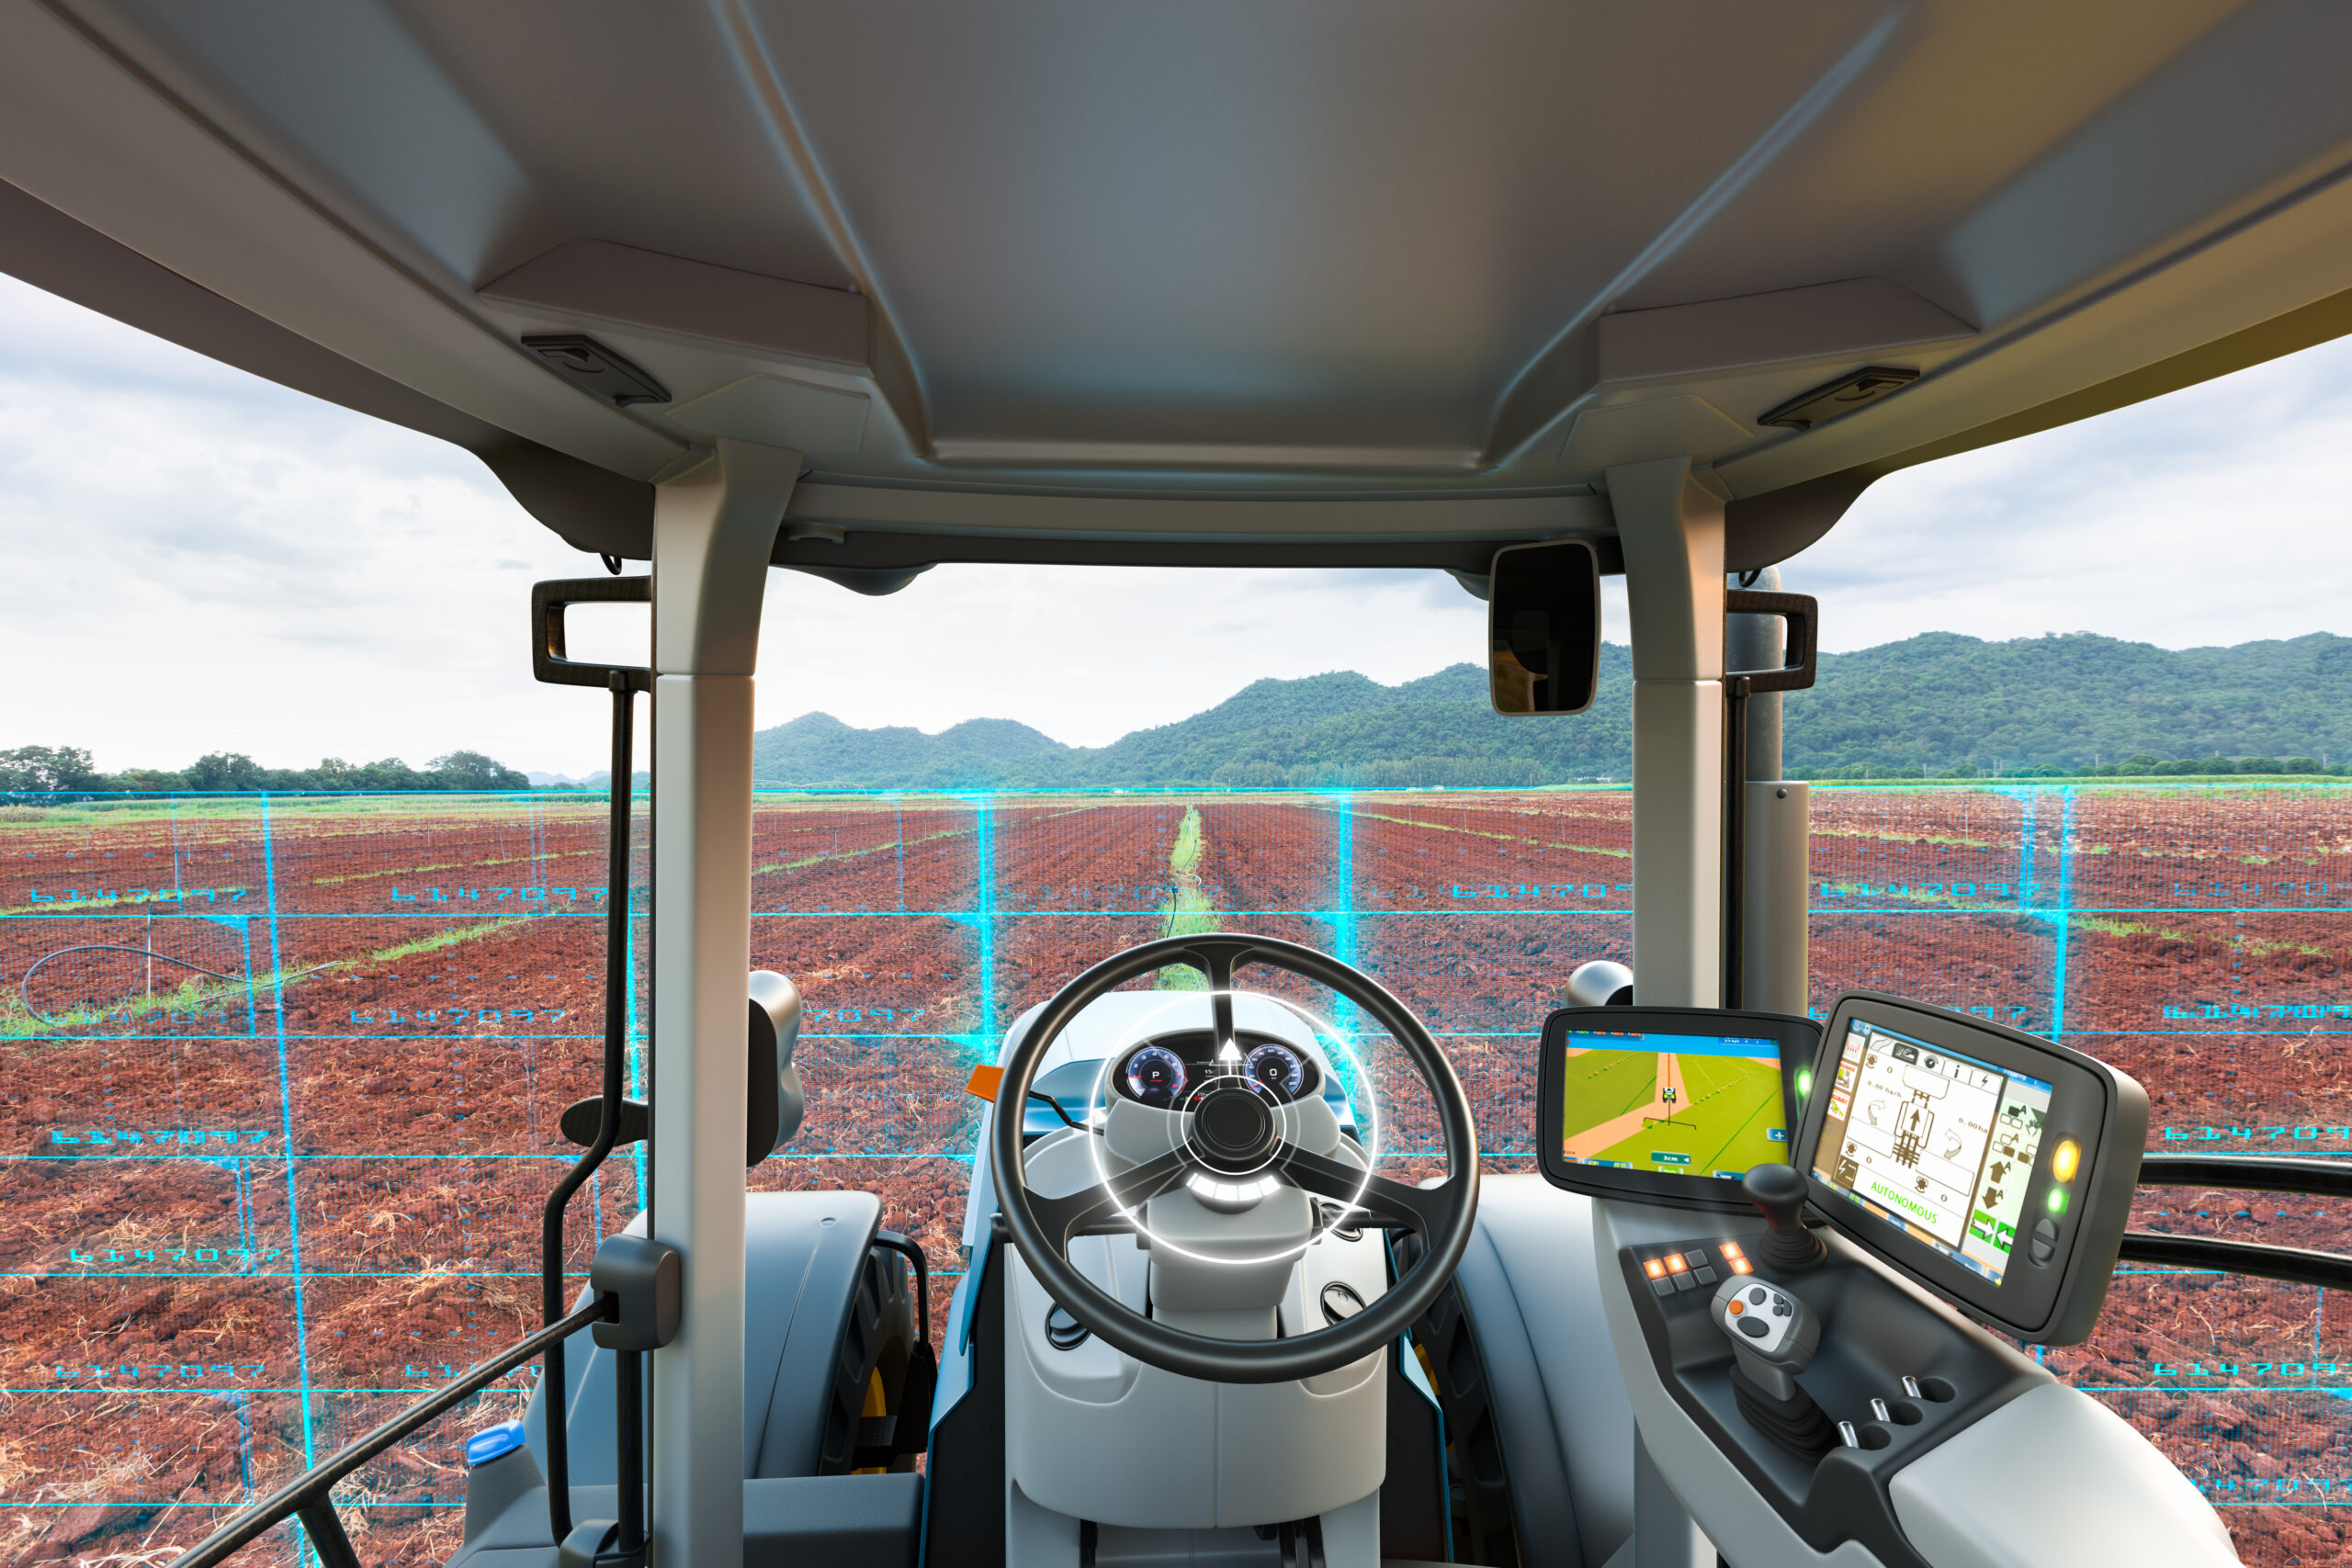 Autonomous tractor scanning agricultural plot, Future technology with smart agriculture farming concept